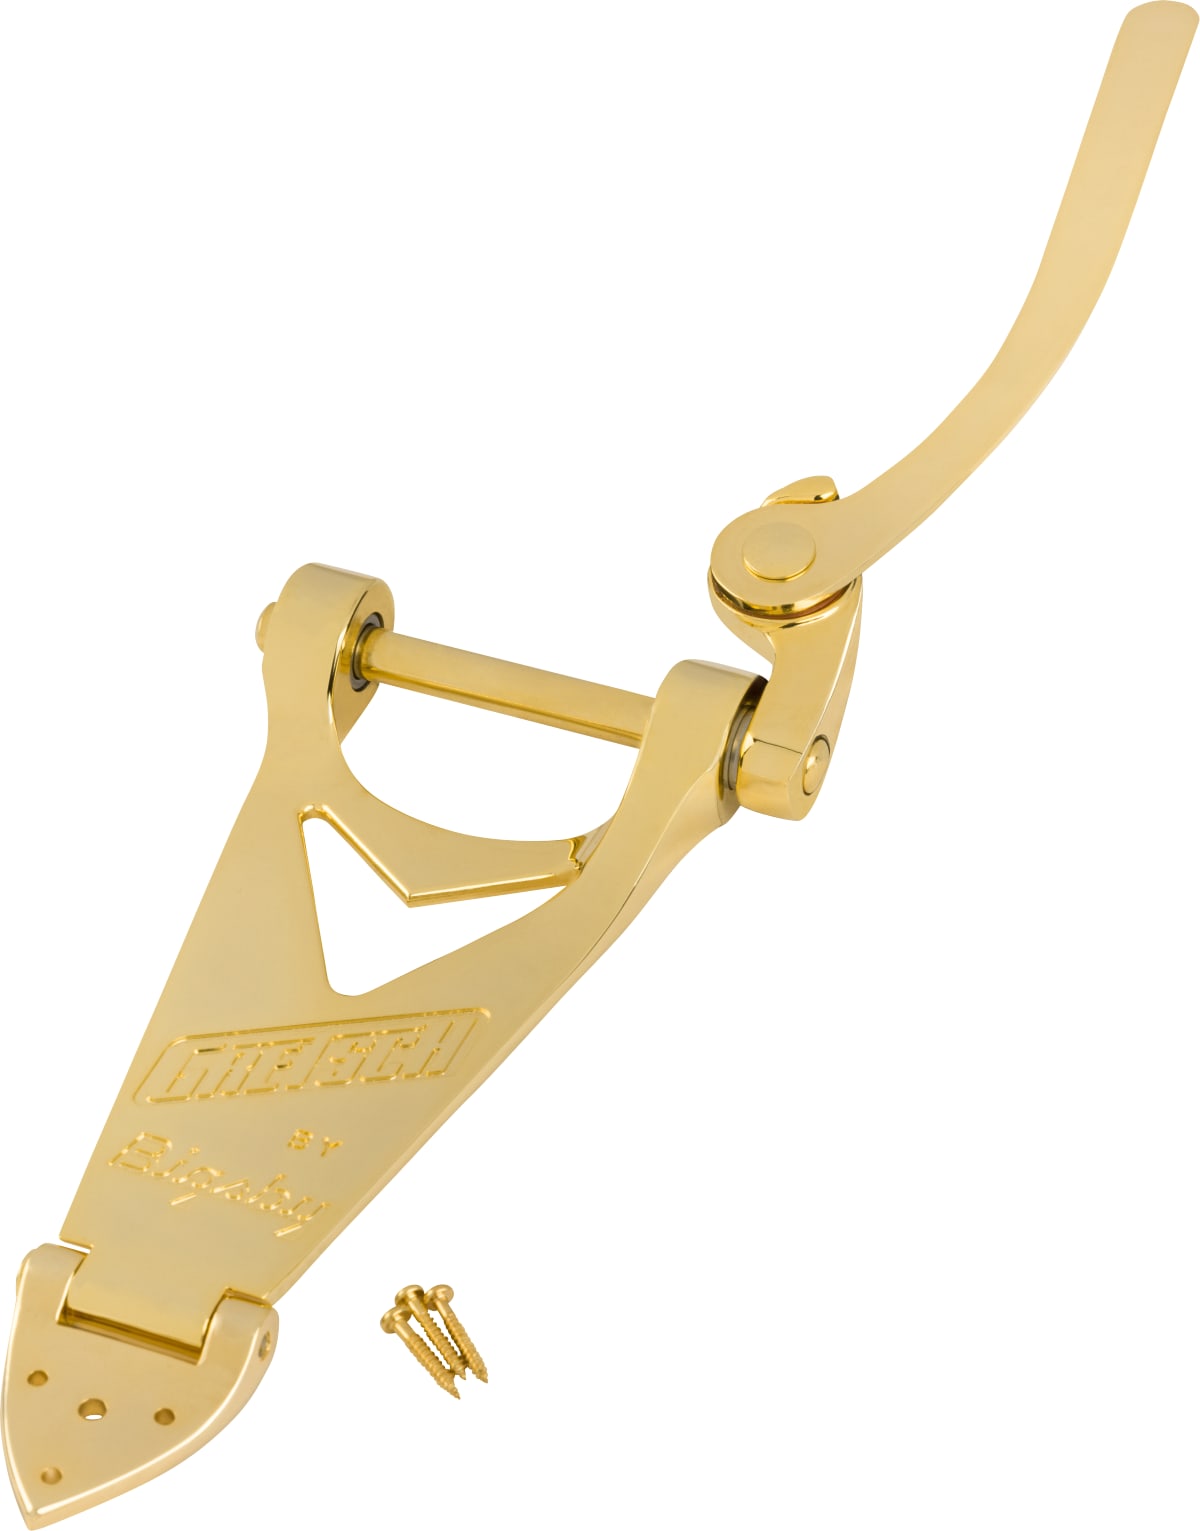 New - GRETSCH® BRANDED TAILPIECE, BIGSBY® B6, Gold